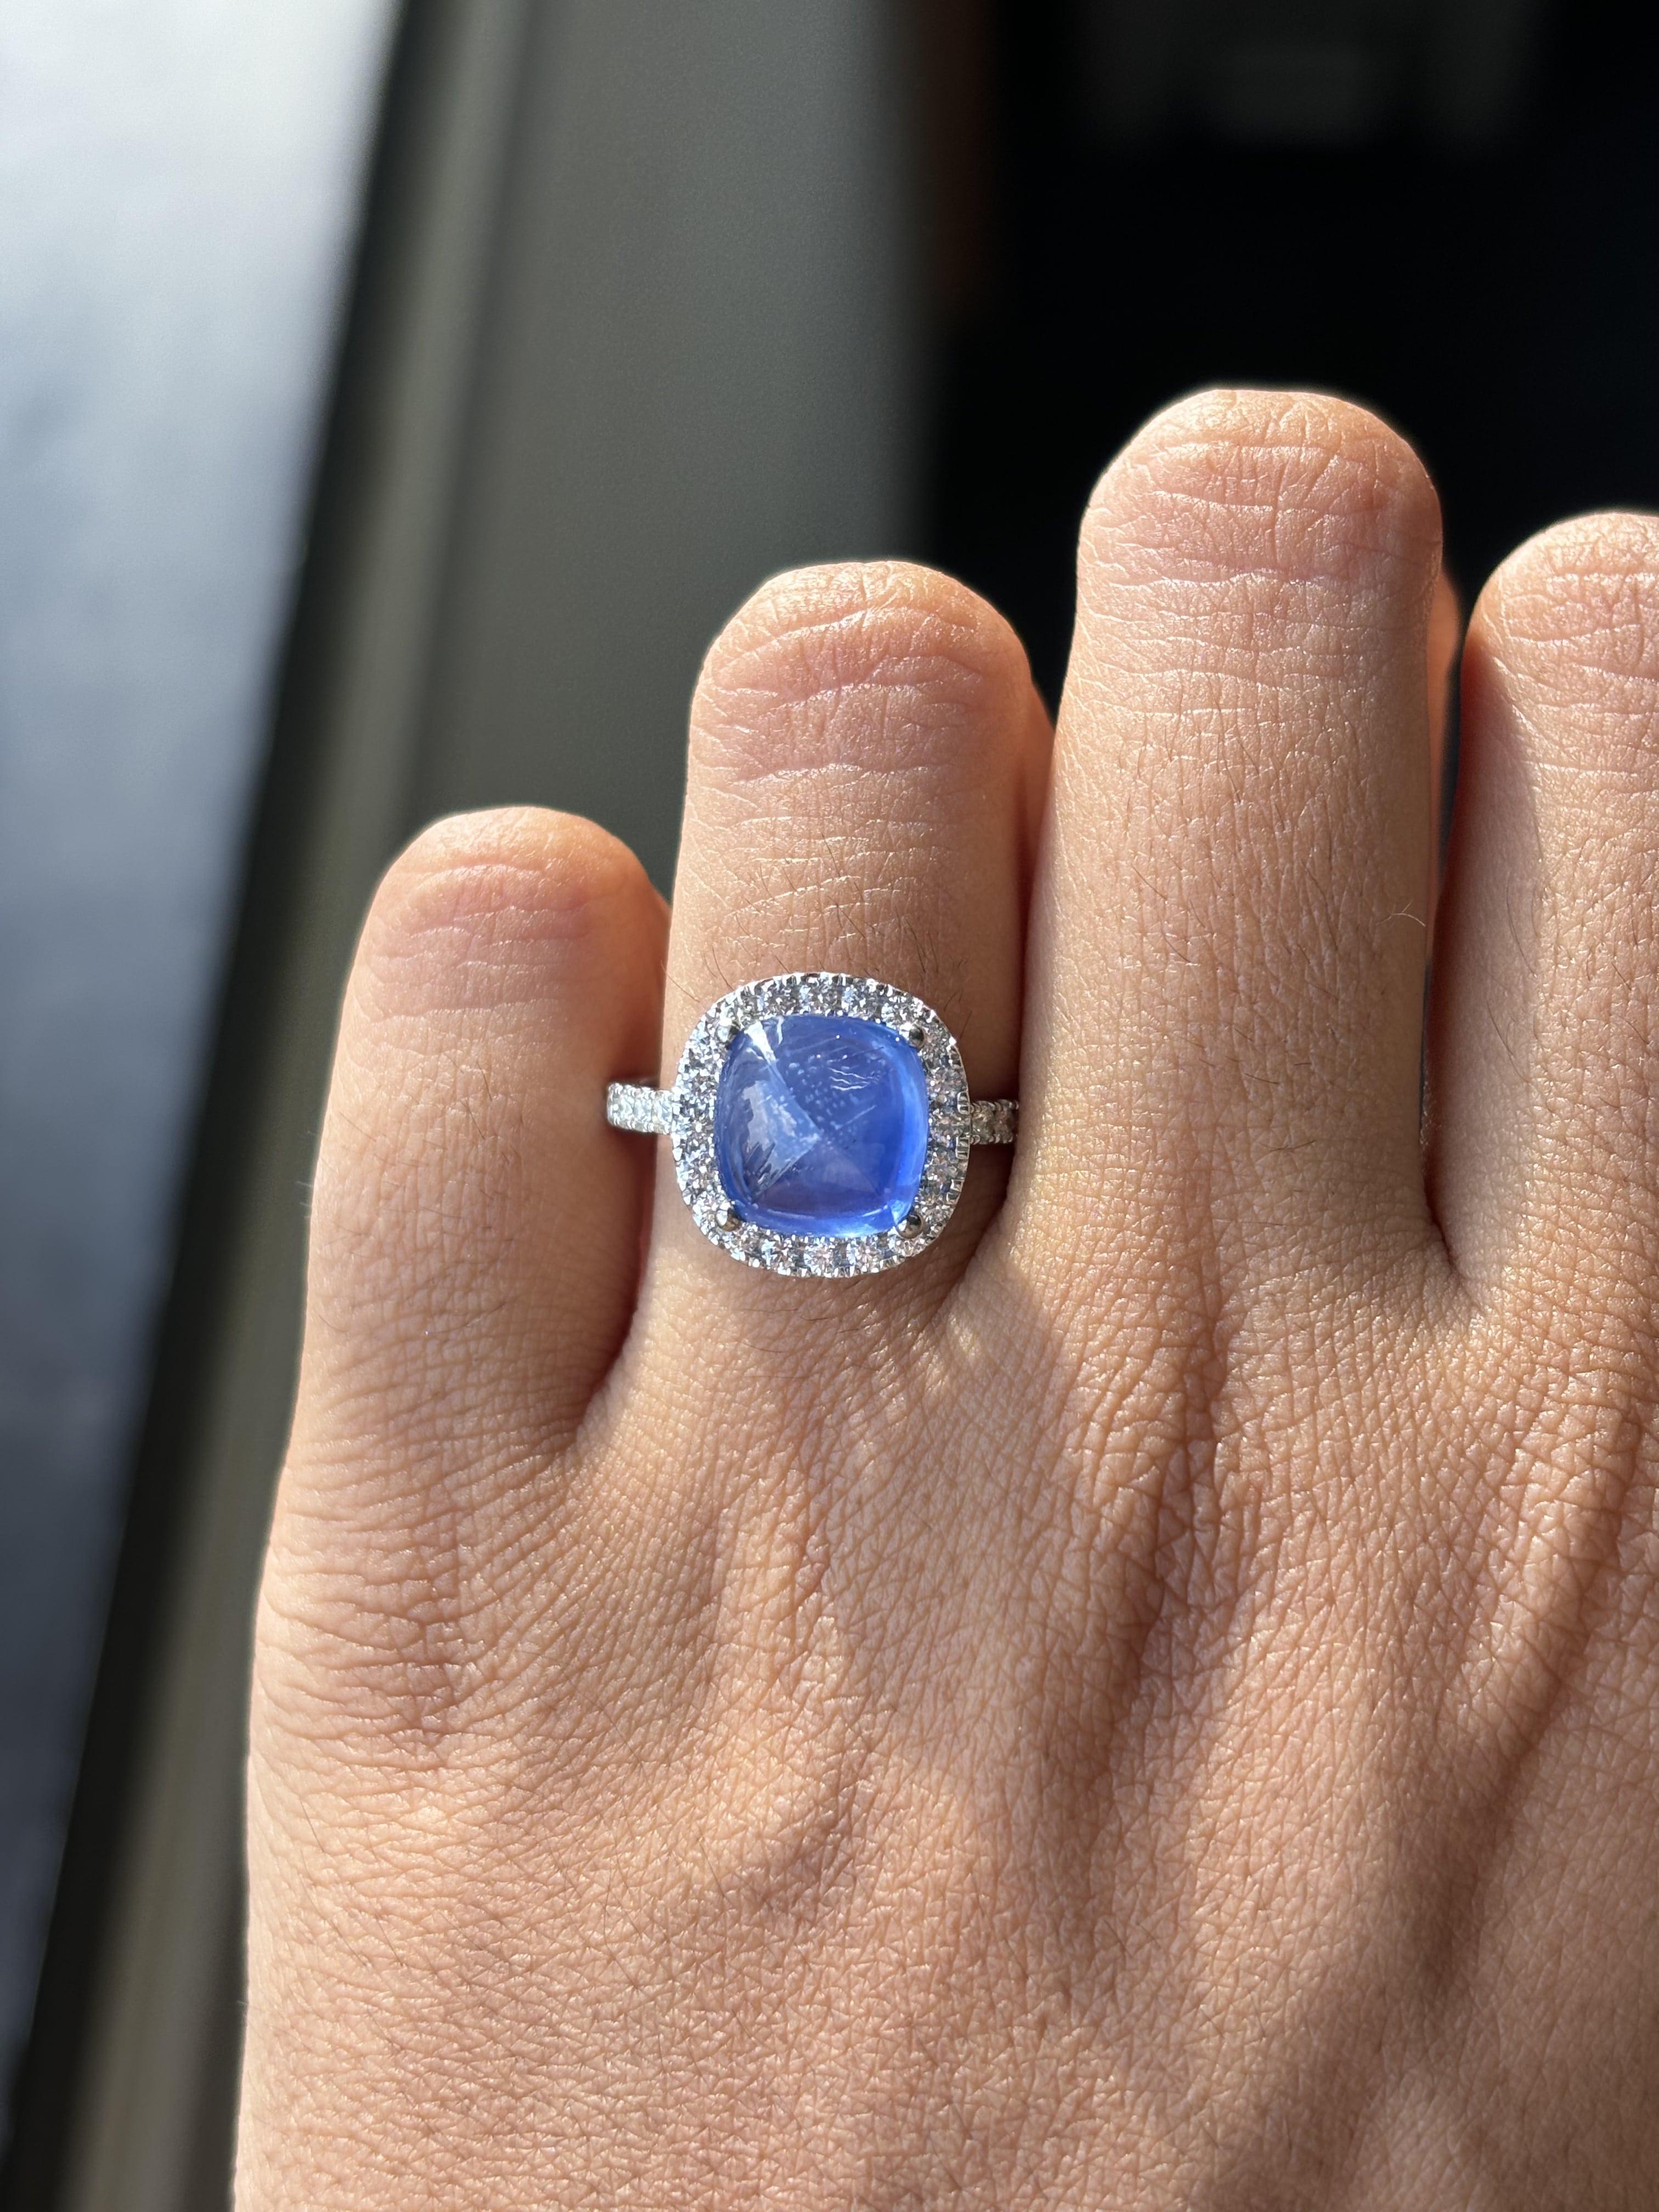 4.23 Carat Sugarloaf Ceylon Sapphire Ring with Halo Diamonds in 14K White Gold For Sale 4